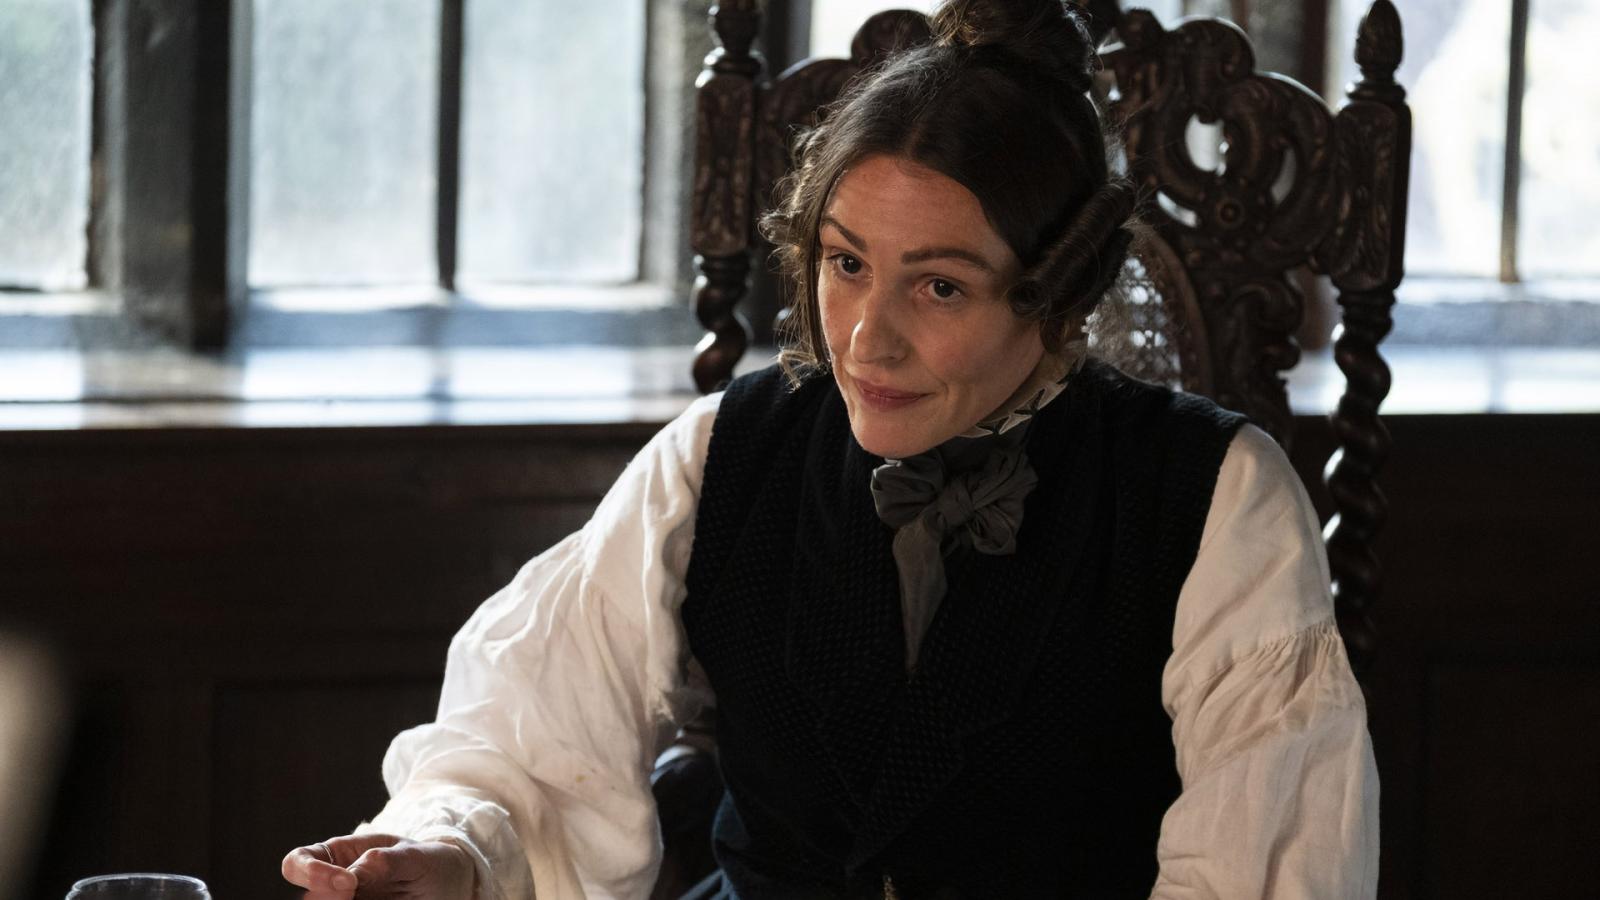 Looking For Your Next Binge? 6 Must-Watch Period Dramas, According to Reddit - image 4